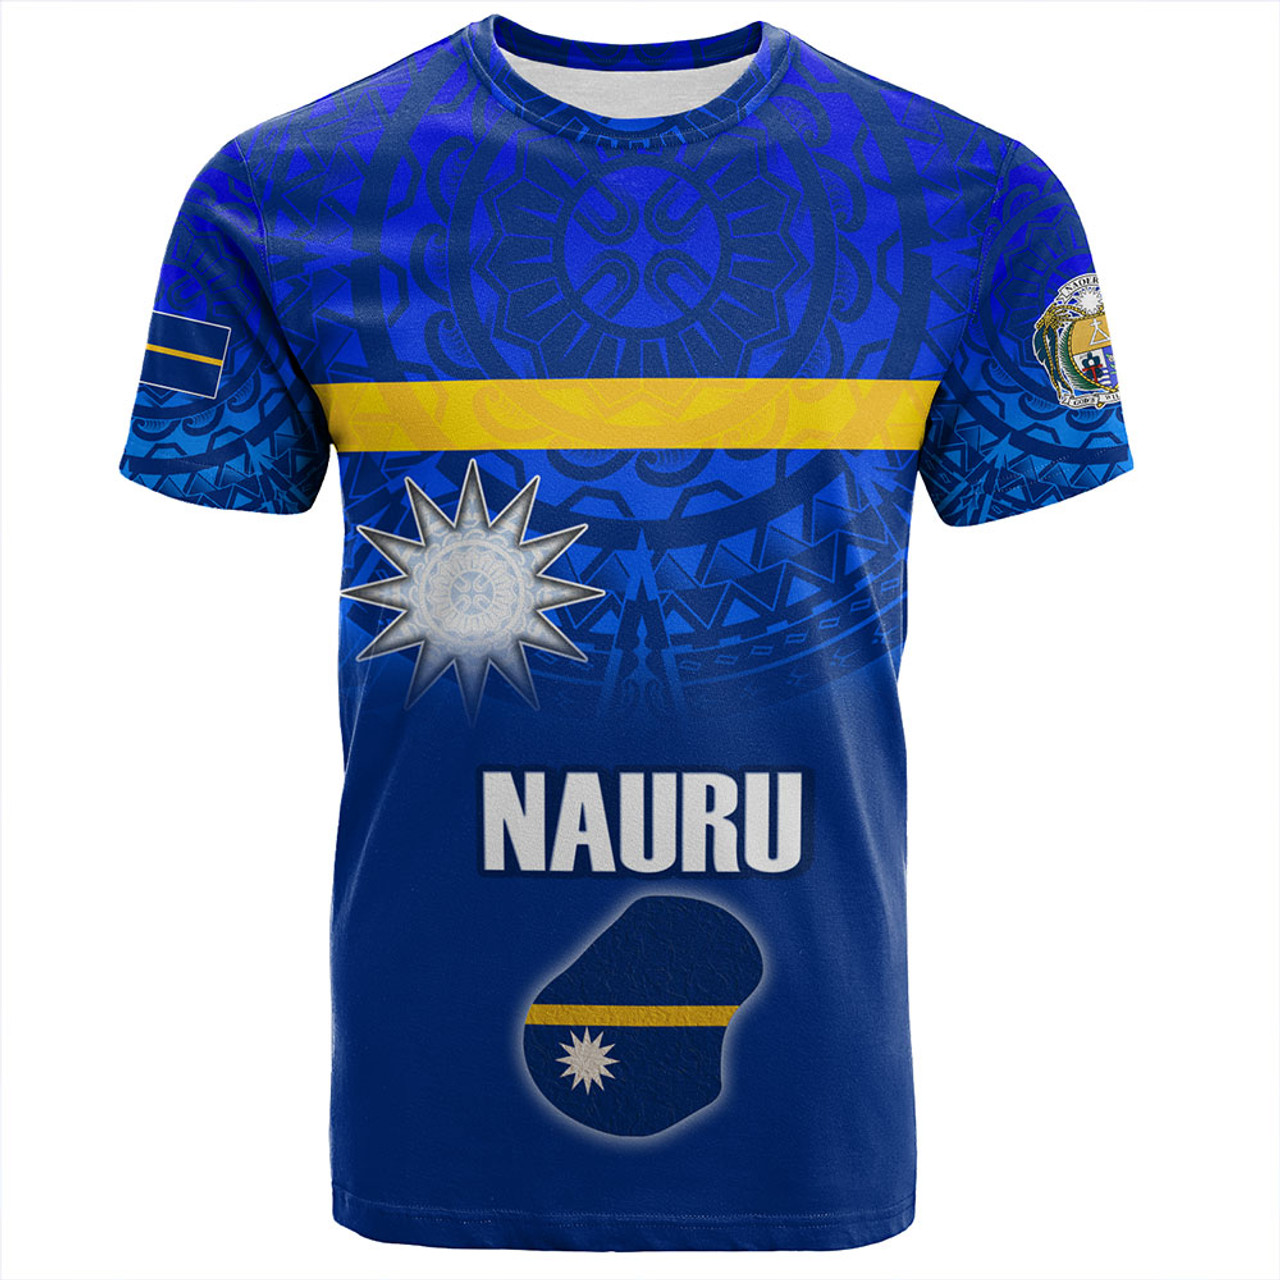 Nauru T-Shirt Flag Color With Traditional Patterns